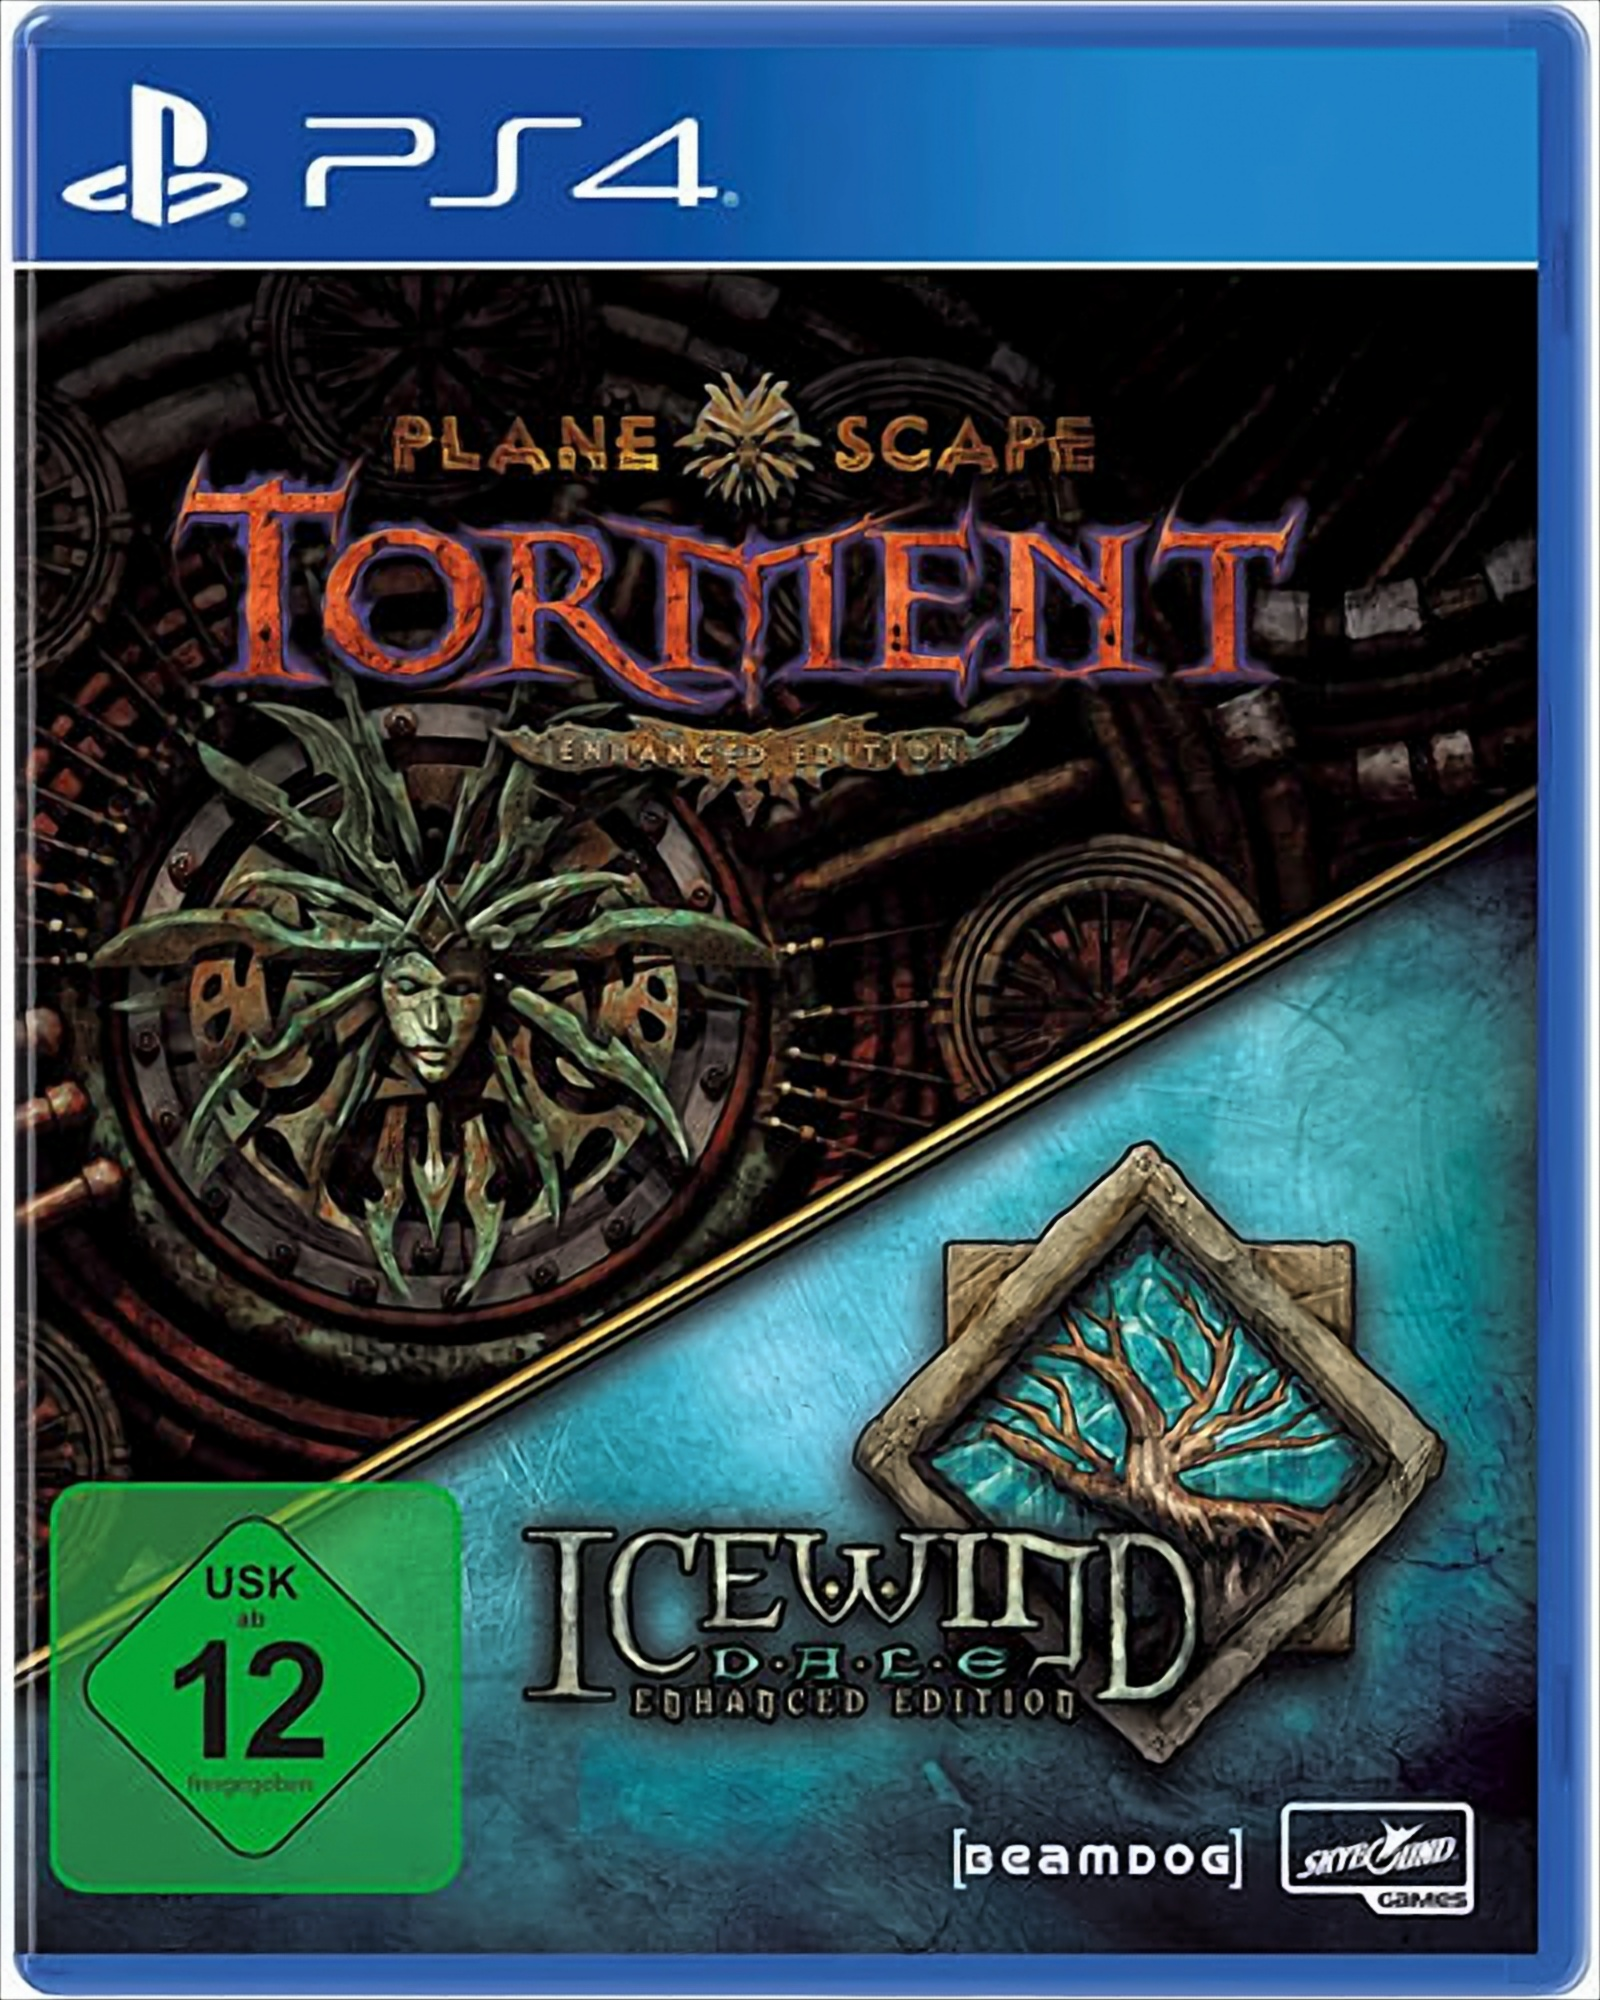 Dale Edition Icewind [PlayStation Planescape: 4] - Enhanced Torment &